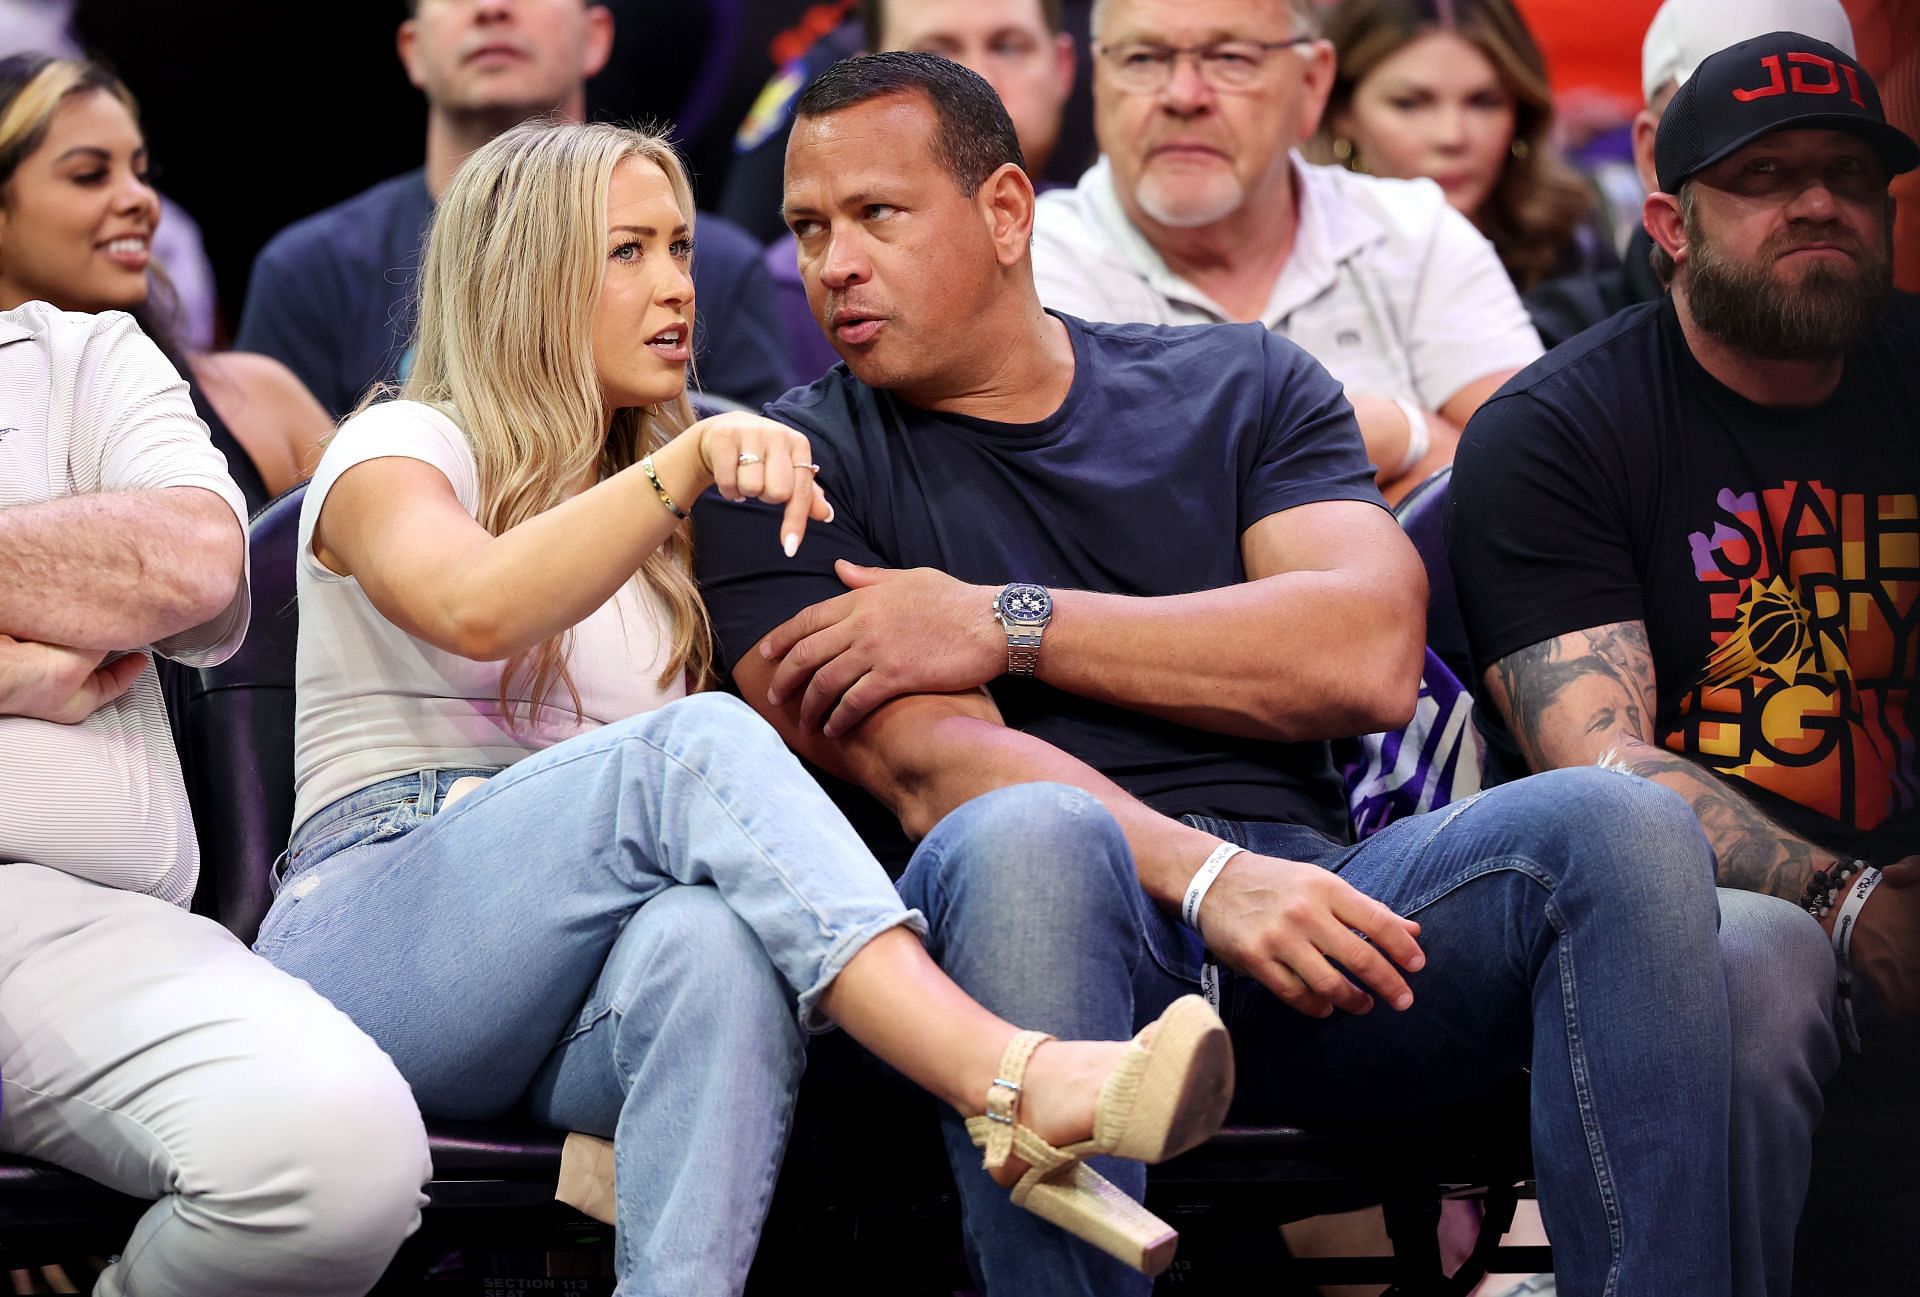 A-Rod and Padgett were spotted at a recent NBA playoff game between the Dallas Mavericks and the Phoenix Suns.